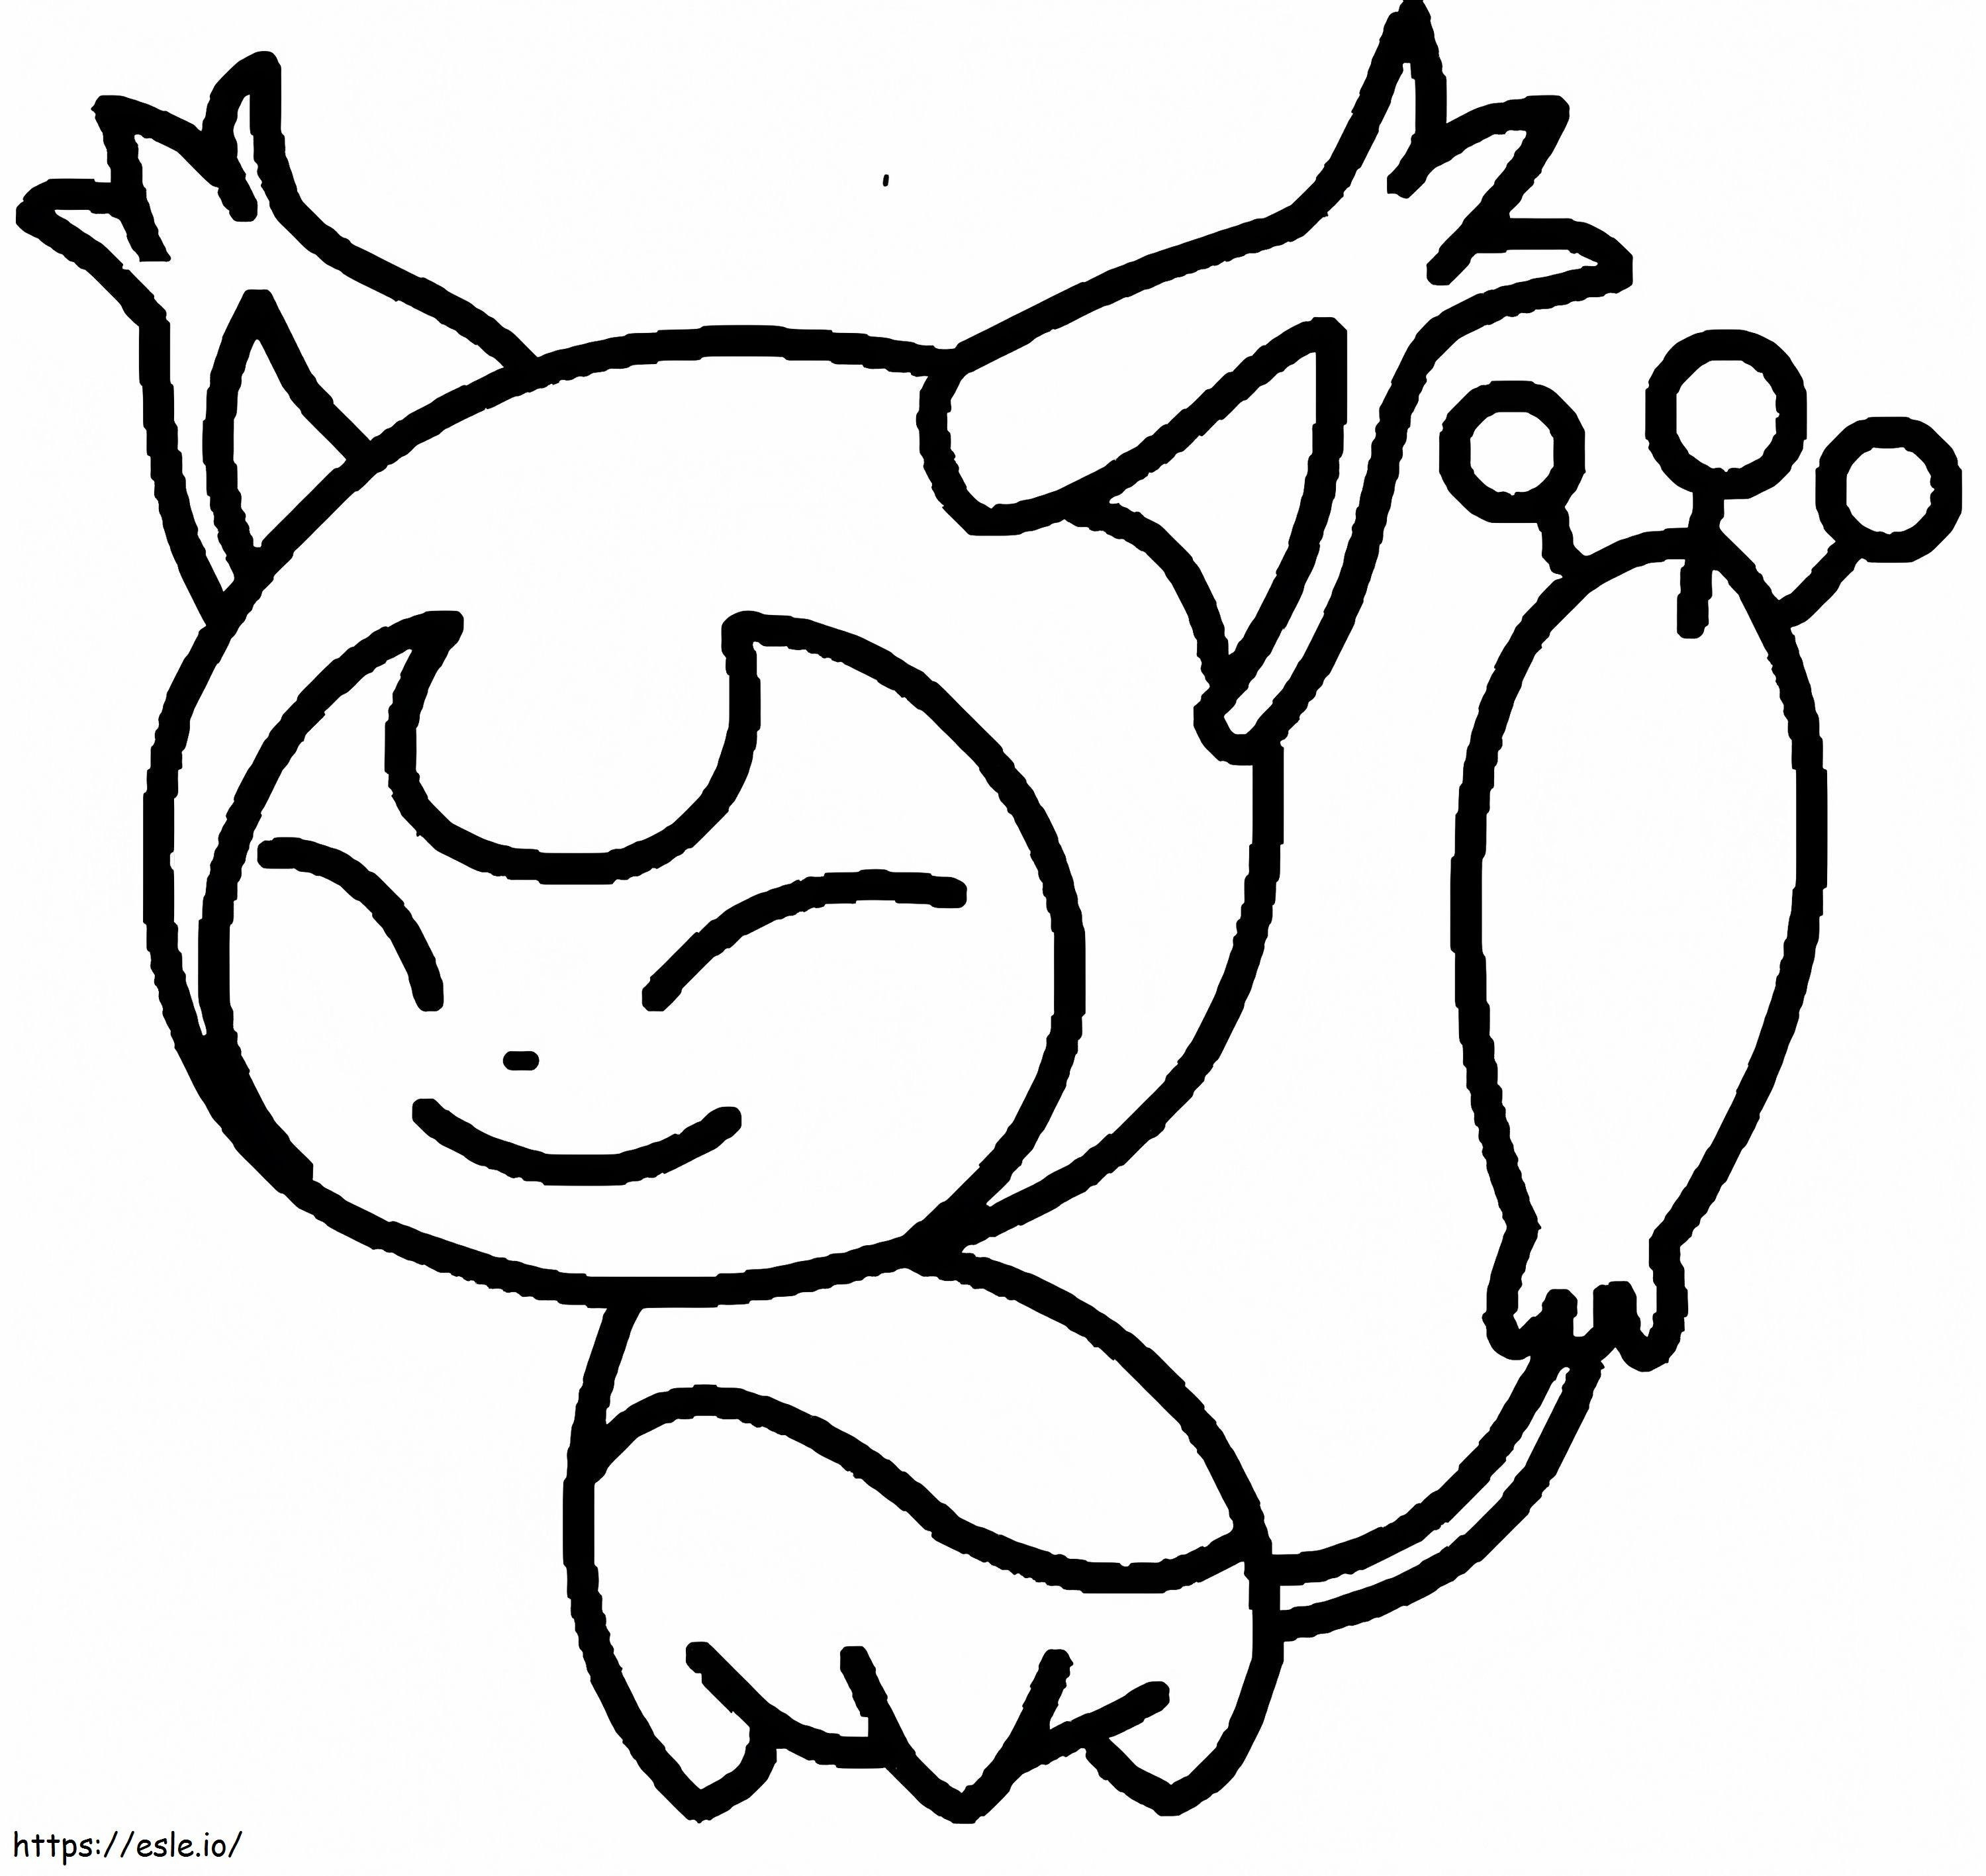 Lovely Skitty Pokemon coloring page